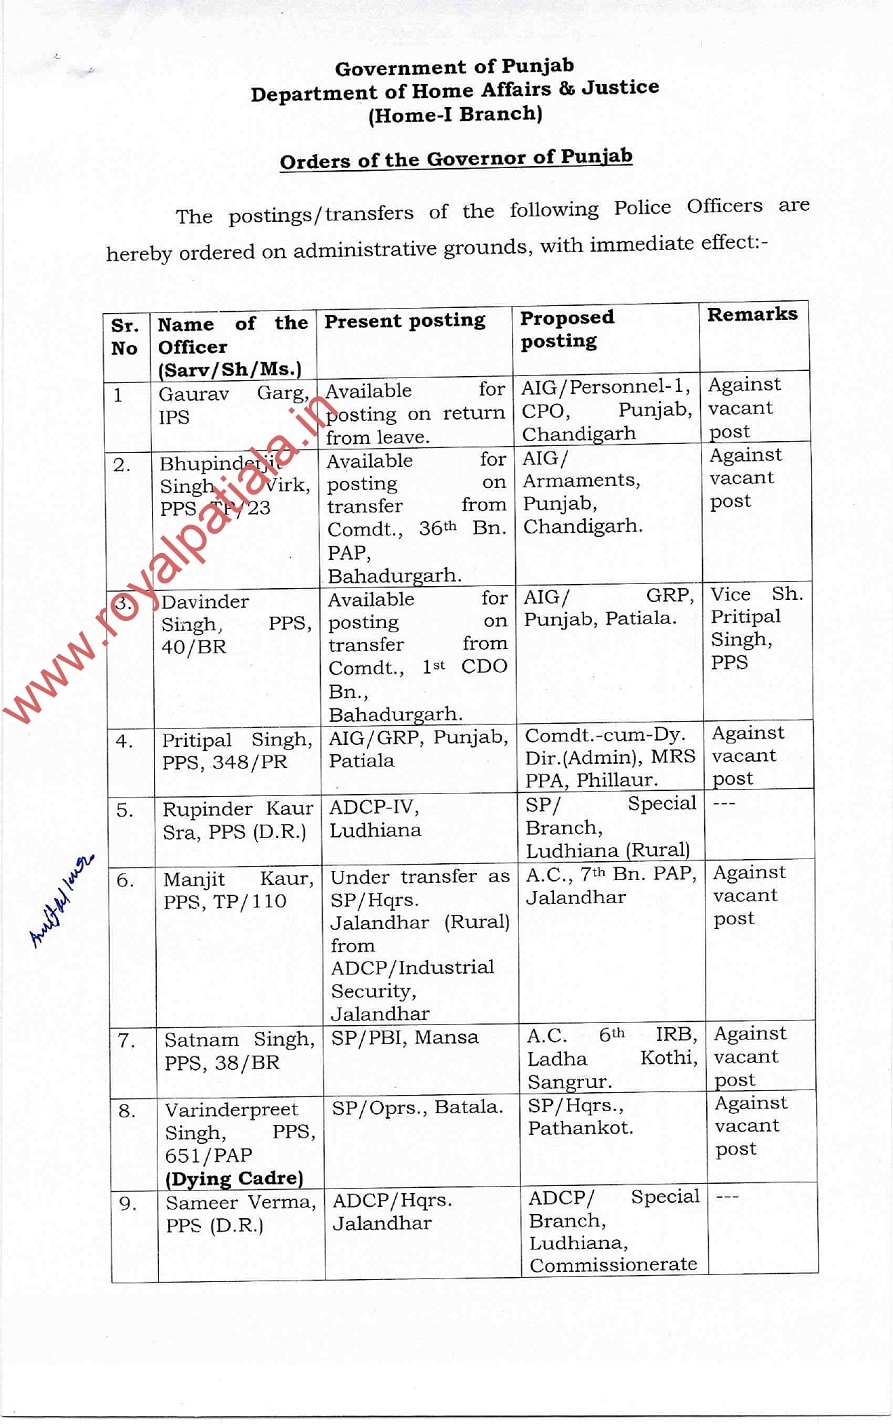 10 IPS-PPS transferred in Punjab